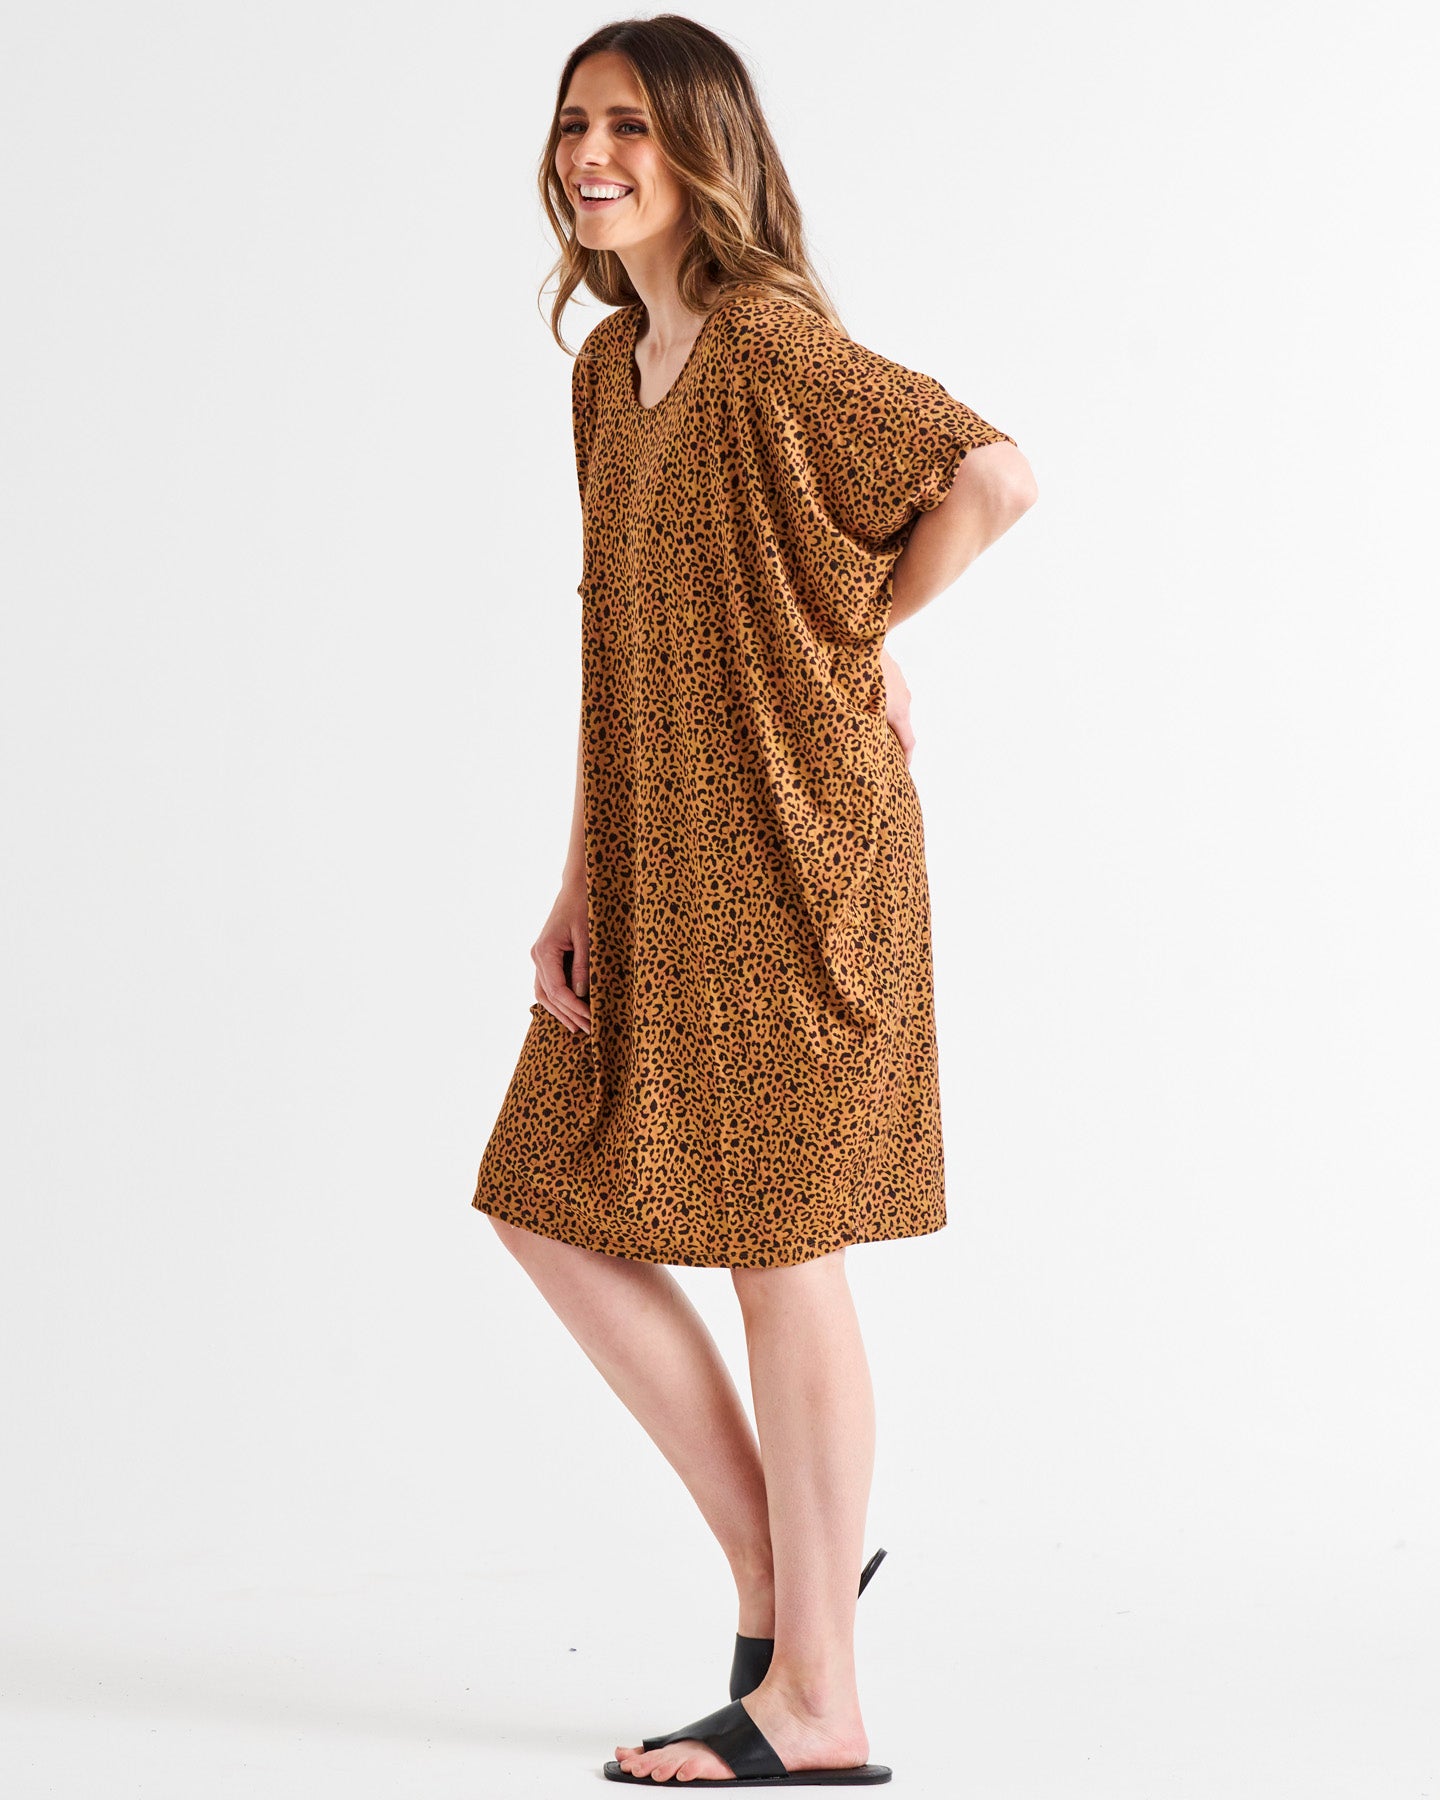 Maui Loose Fitting Stretchy Scoop Neck Batwing Above-Knee Dress - Wild Leopard Print